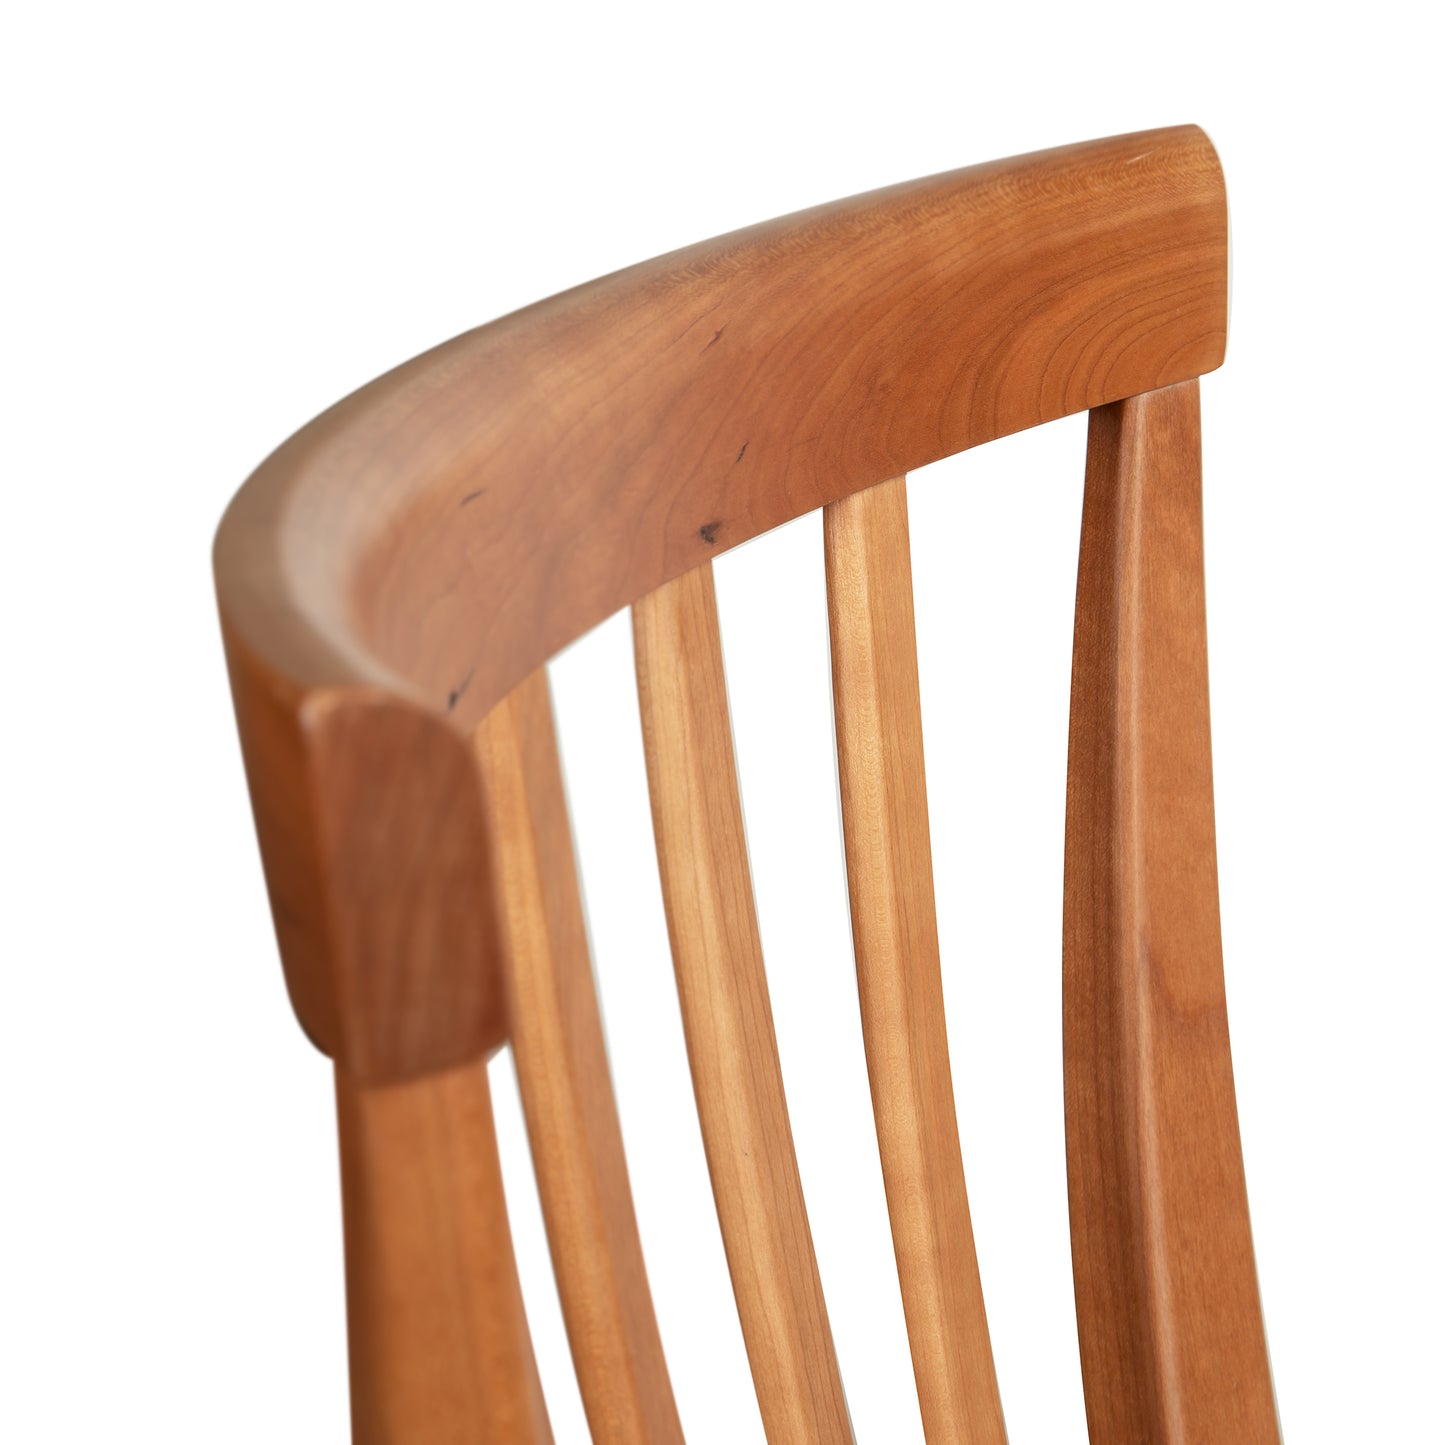 A close up view of a Classic Shaker Chair #1 made by Lyndon Furniture, from natural hardwoods.